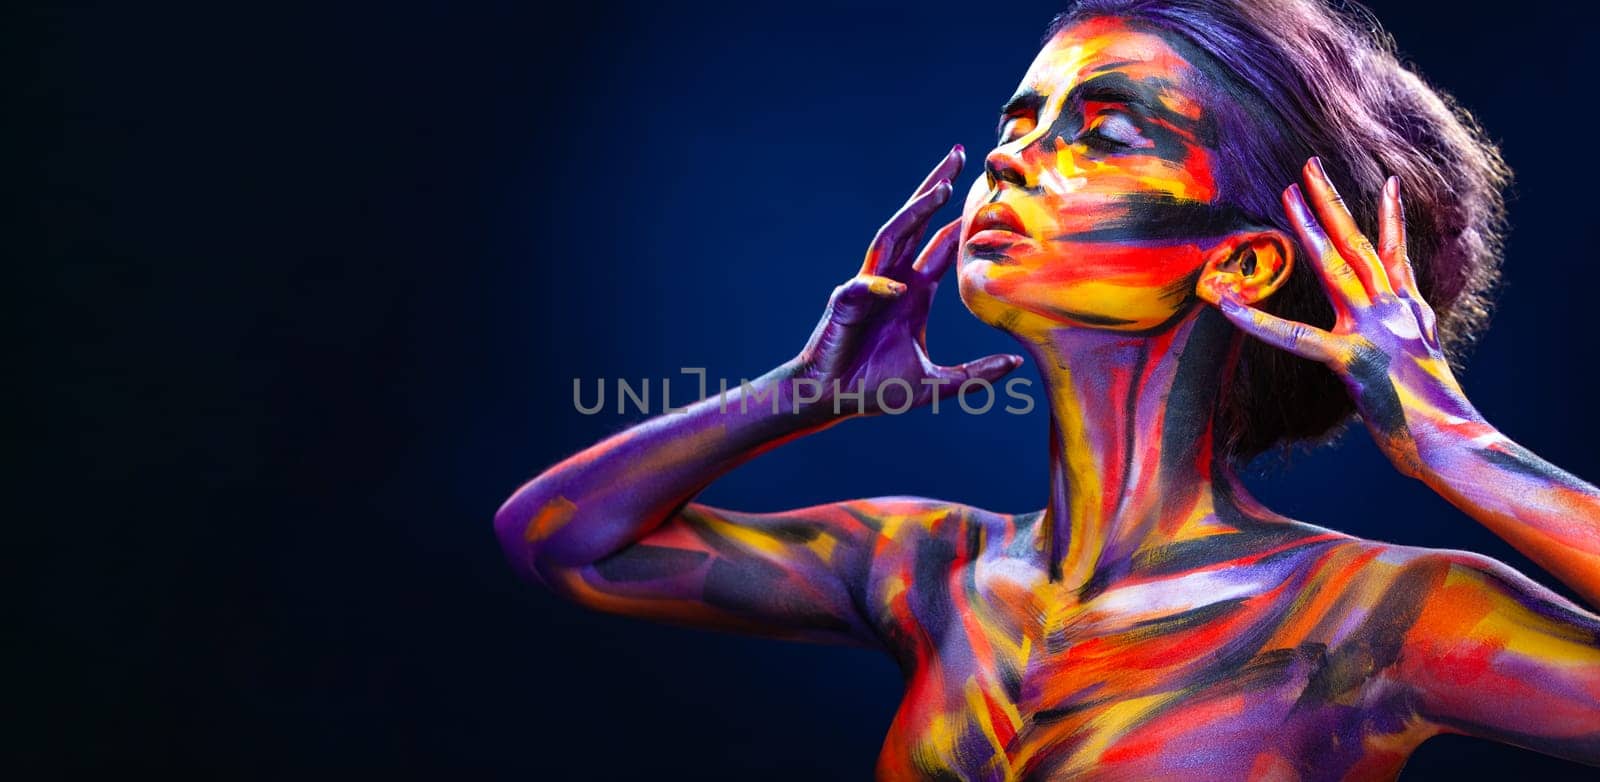 A girl in a glowing neon circle. Woman in color body painting on her face. Cover art for your mixtape, video, song or podcast. Design for book cover